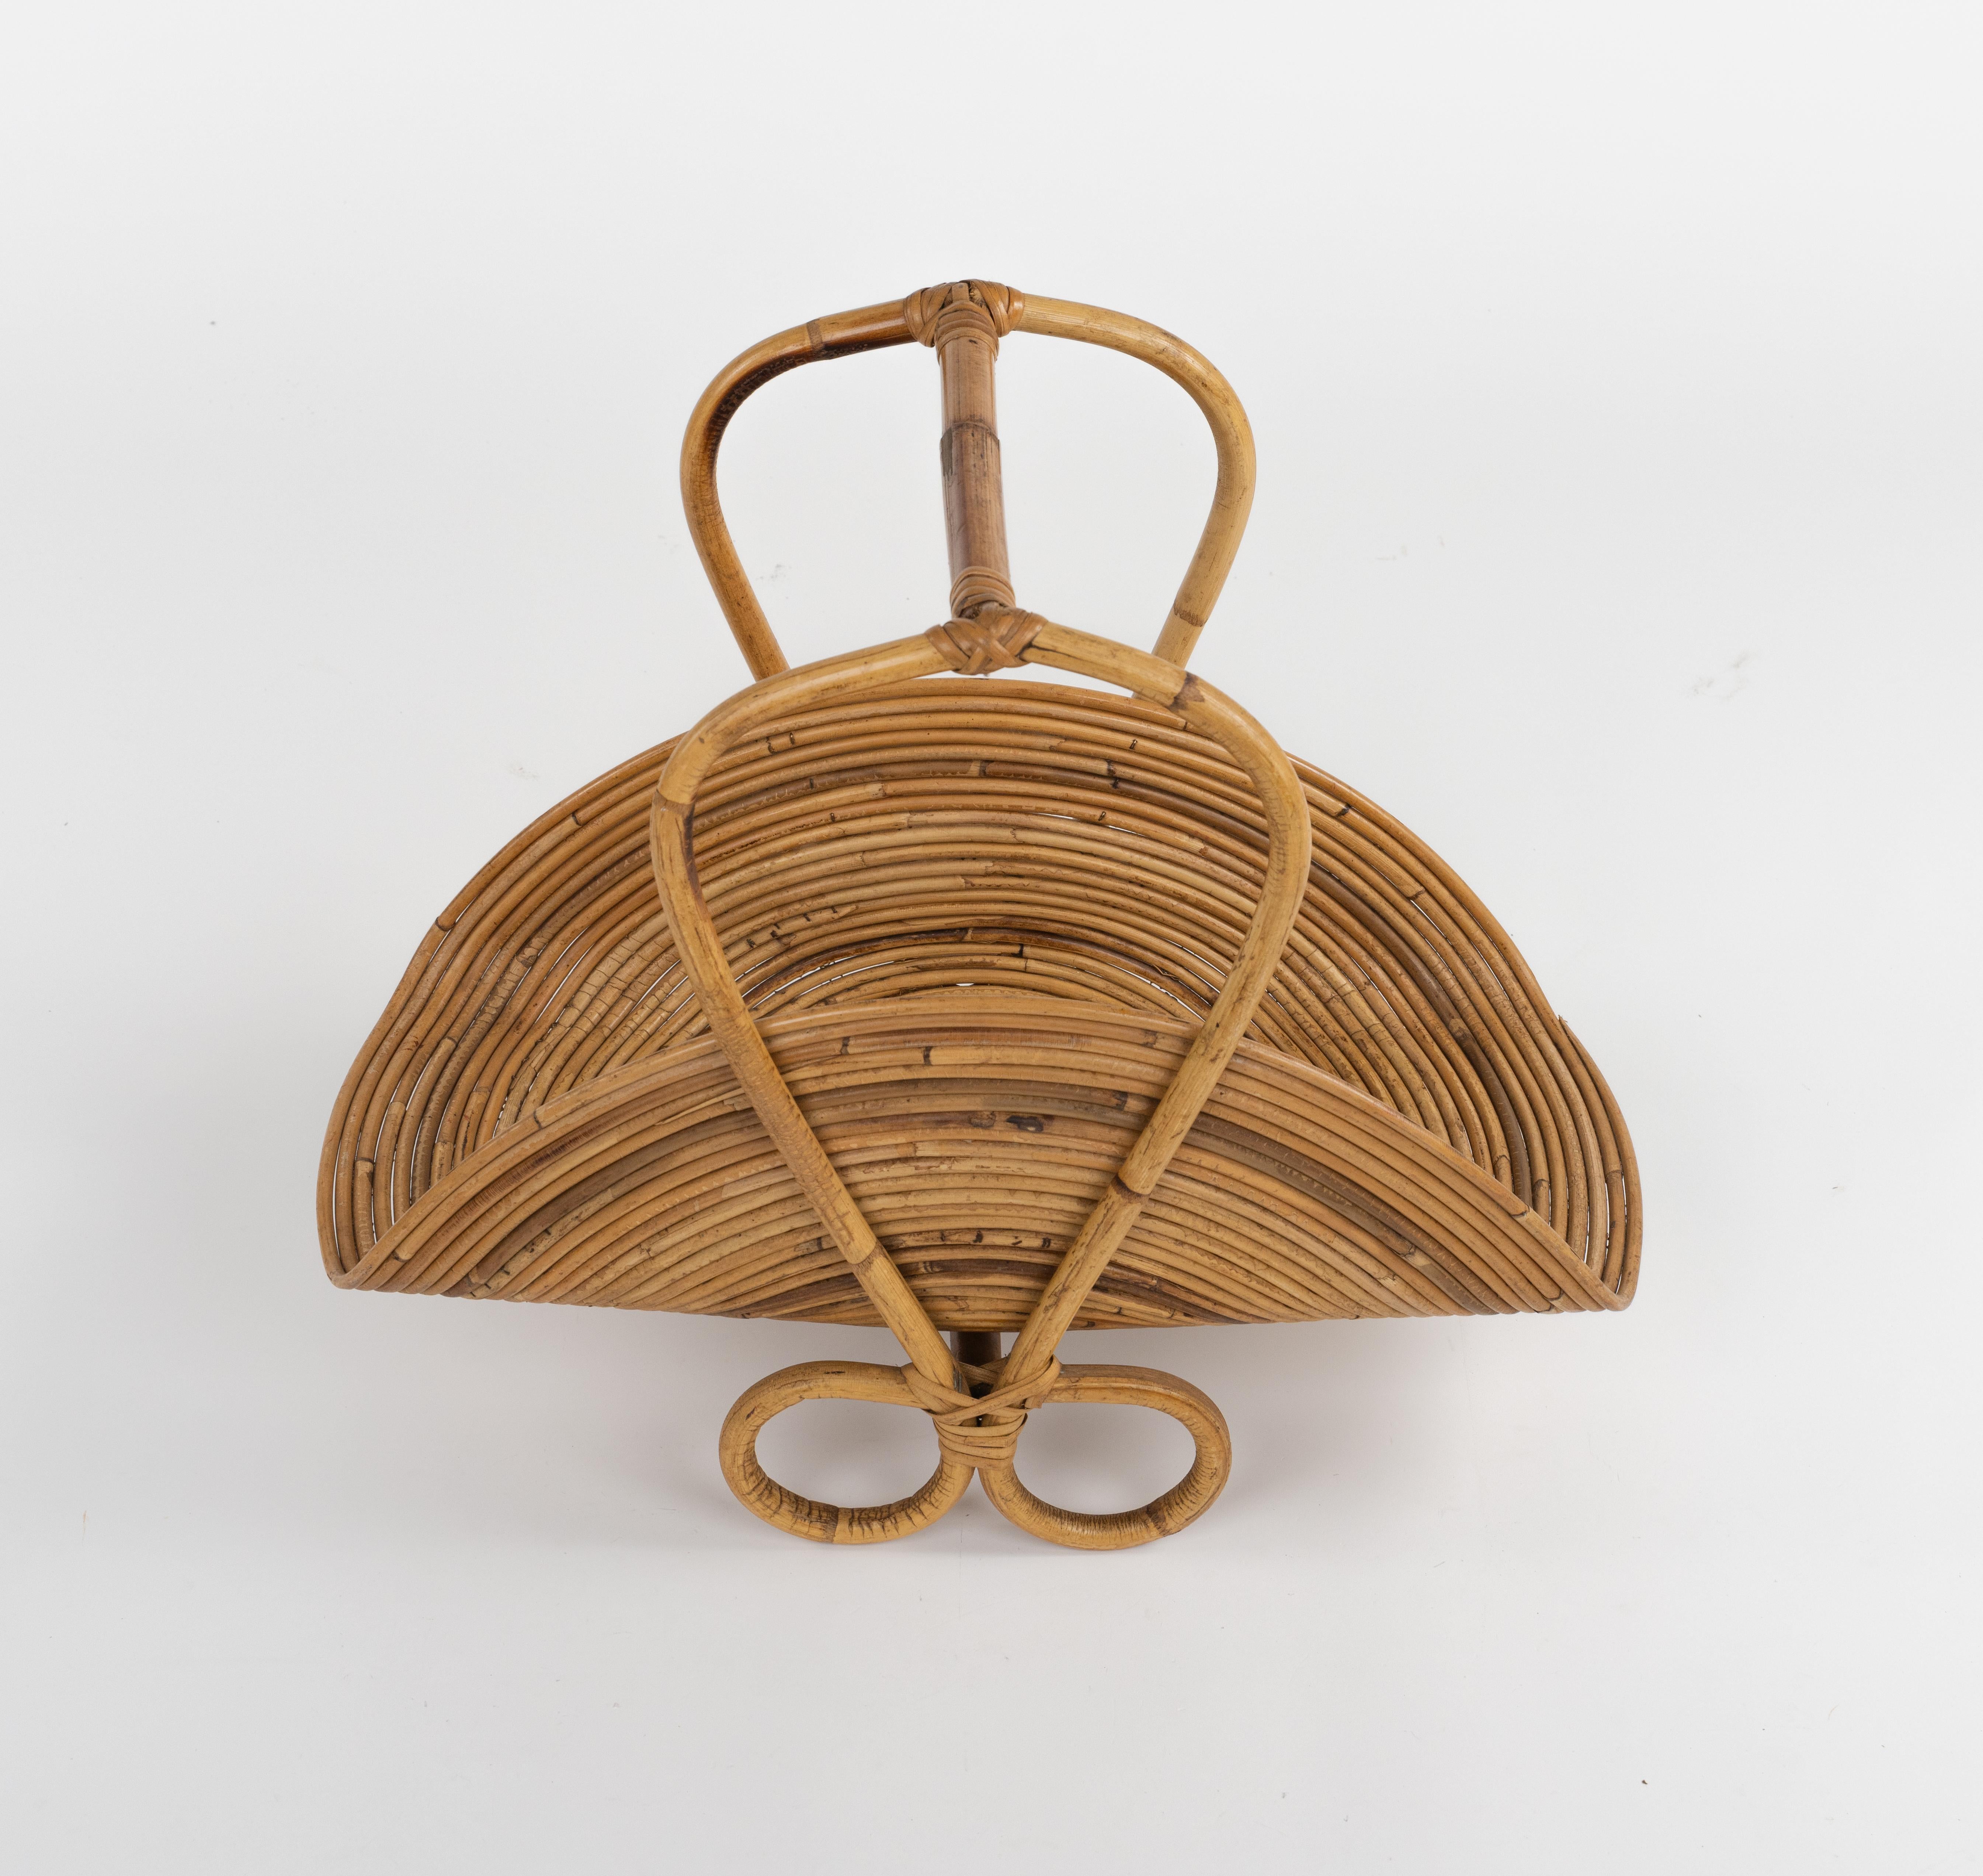 Midcentury amazing Modern French Riviera magazine rack in bamboo structure and curved rattan detailing in the style of Vivai Del Sud.

Made in Italy in the 1960s.

Vivai del sud, Gabriella Crespi and Arpex were the three leading design studios in